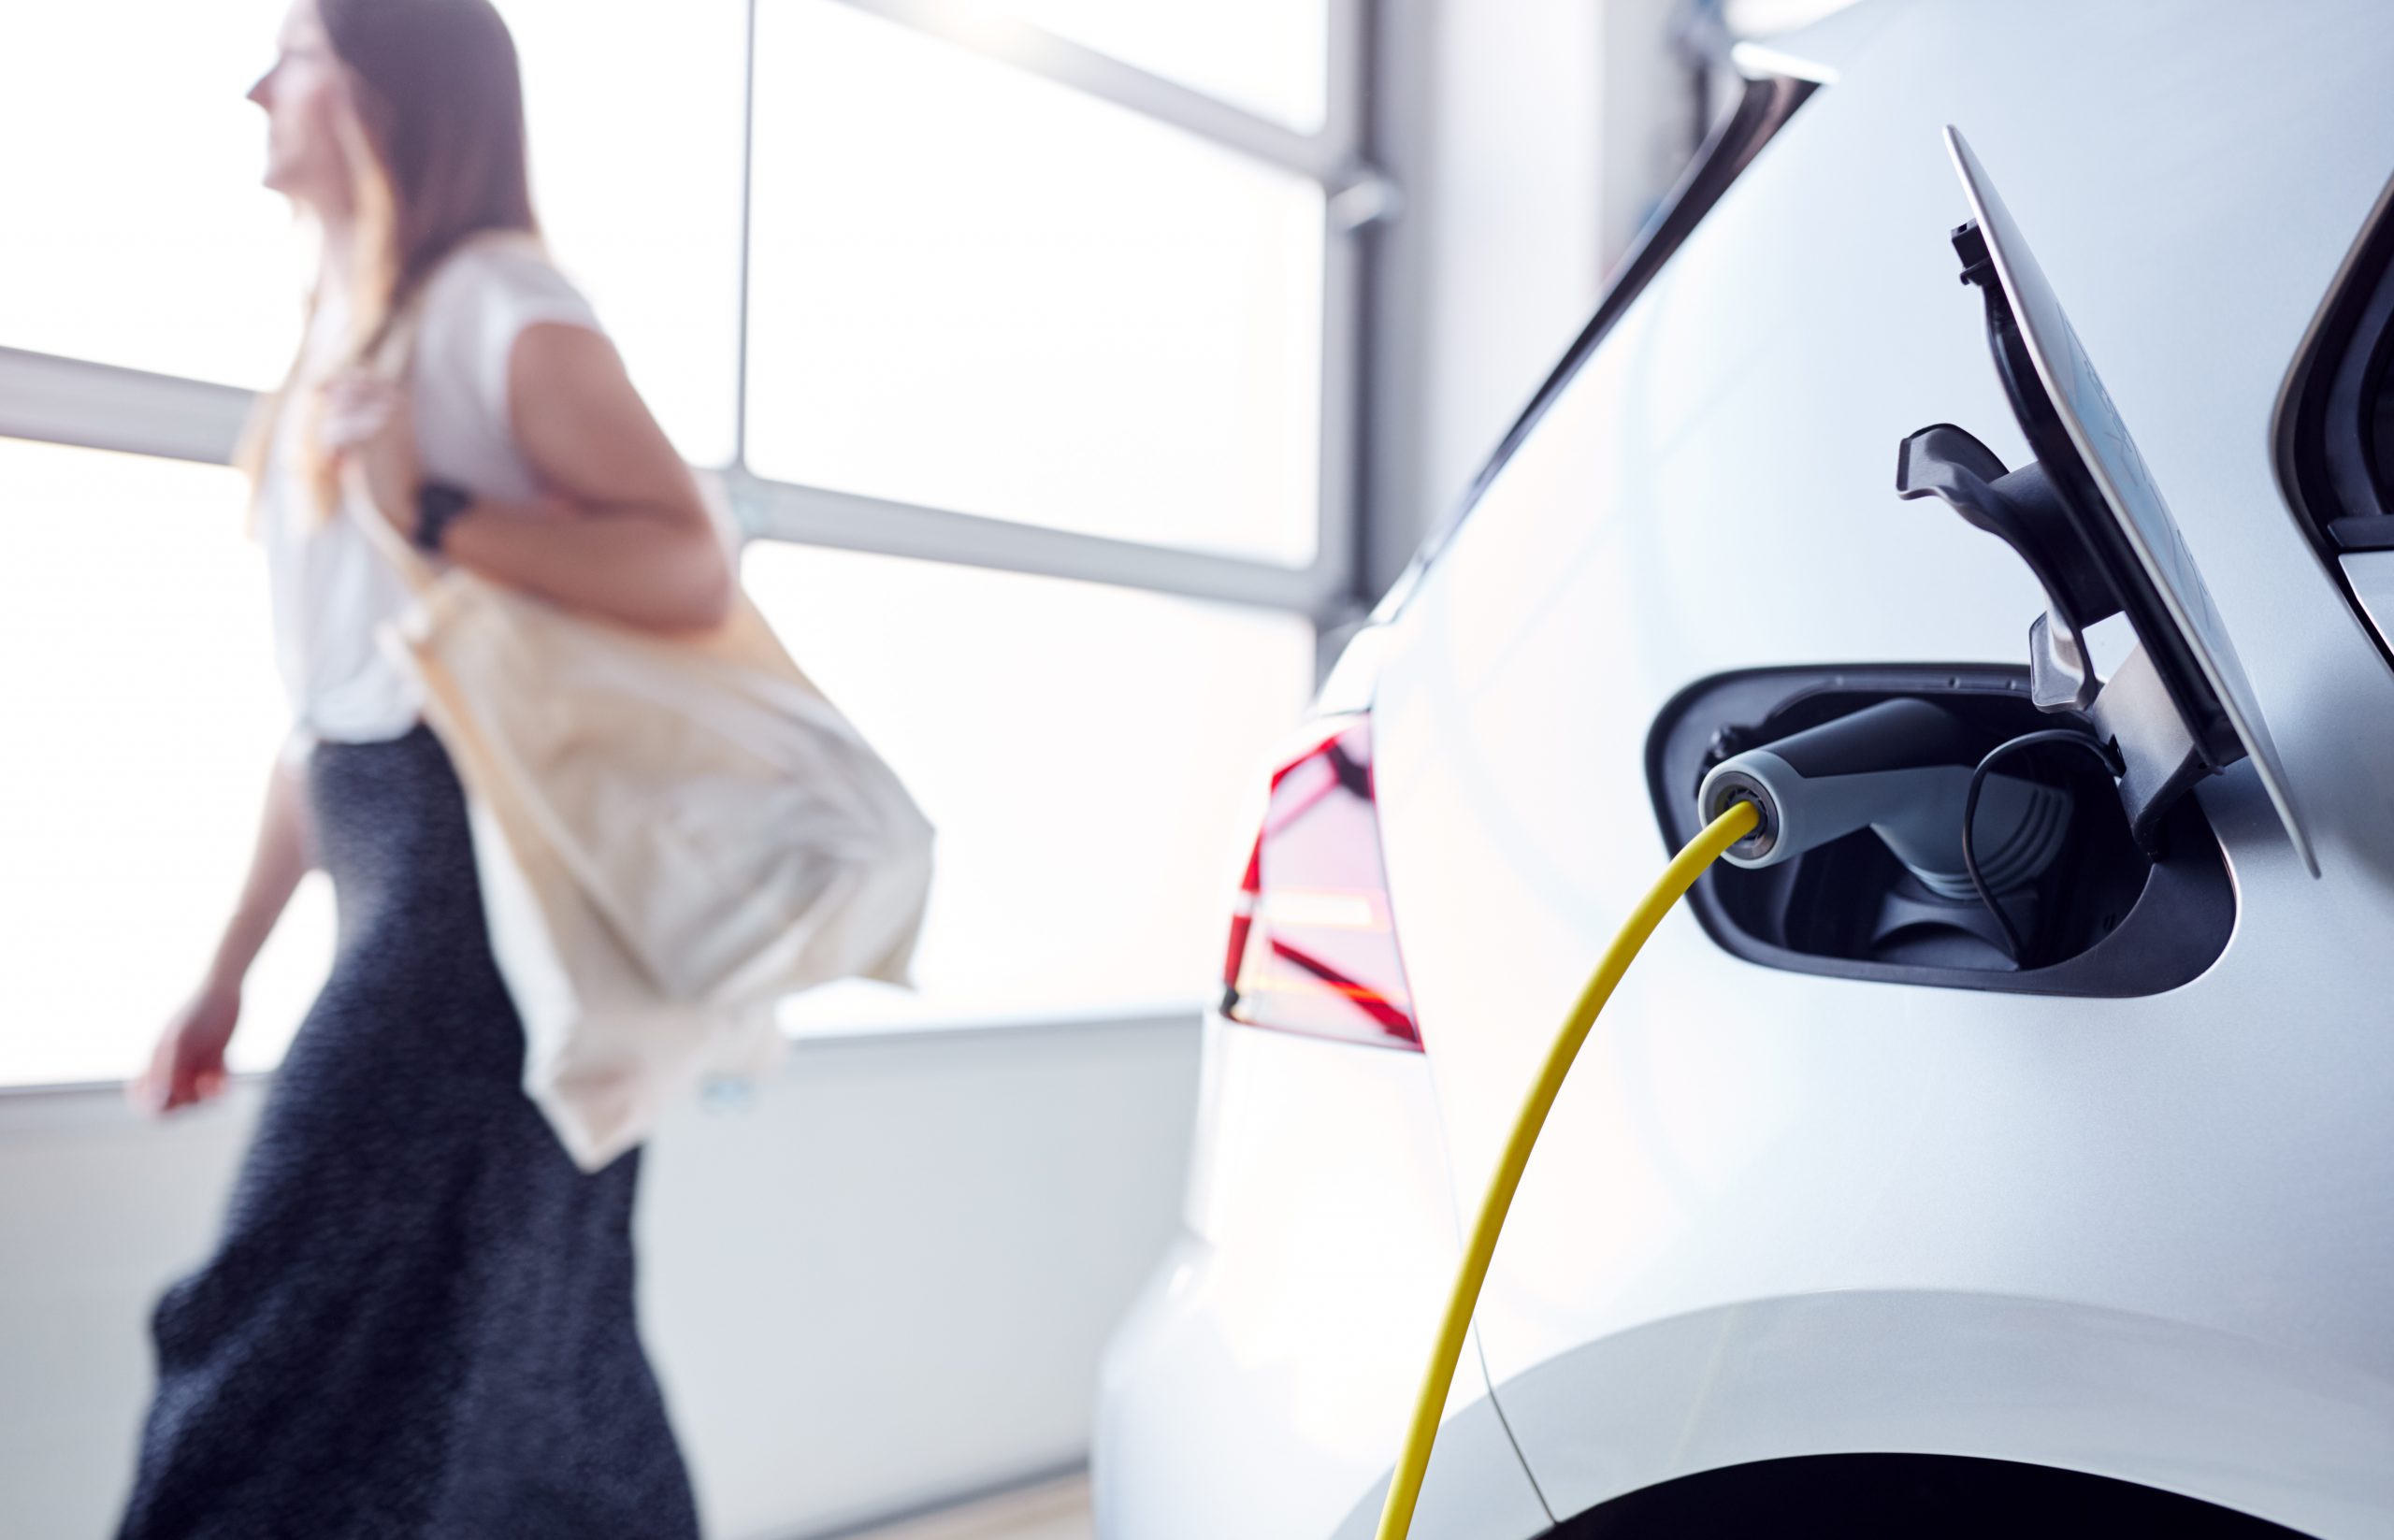 Why consider Electric Vehicle charging on your property?